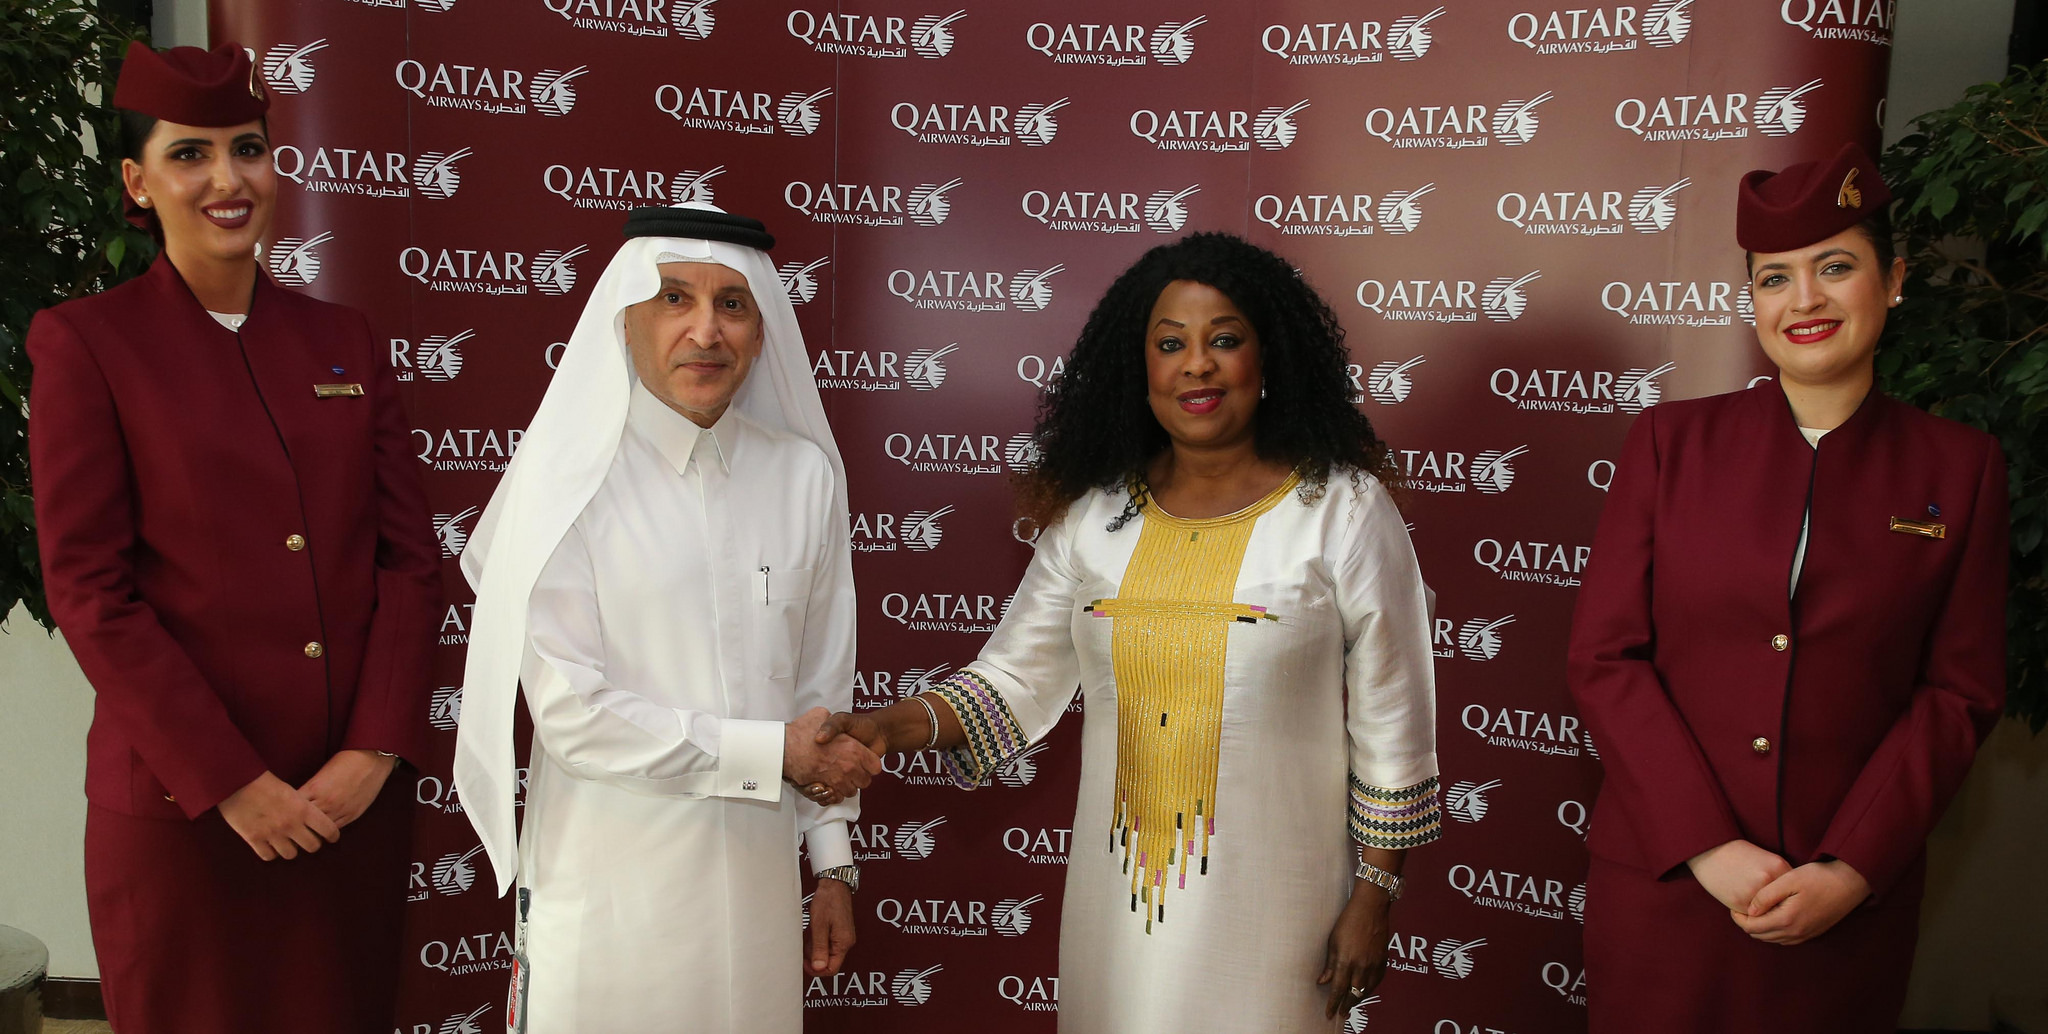 Qatar Airways is now the official partner and official